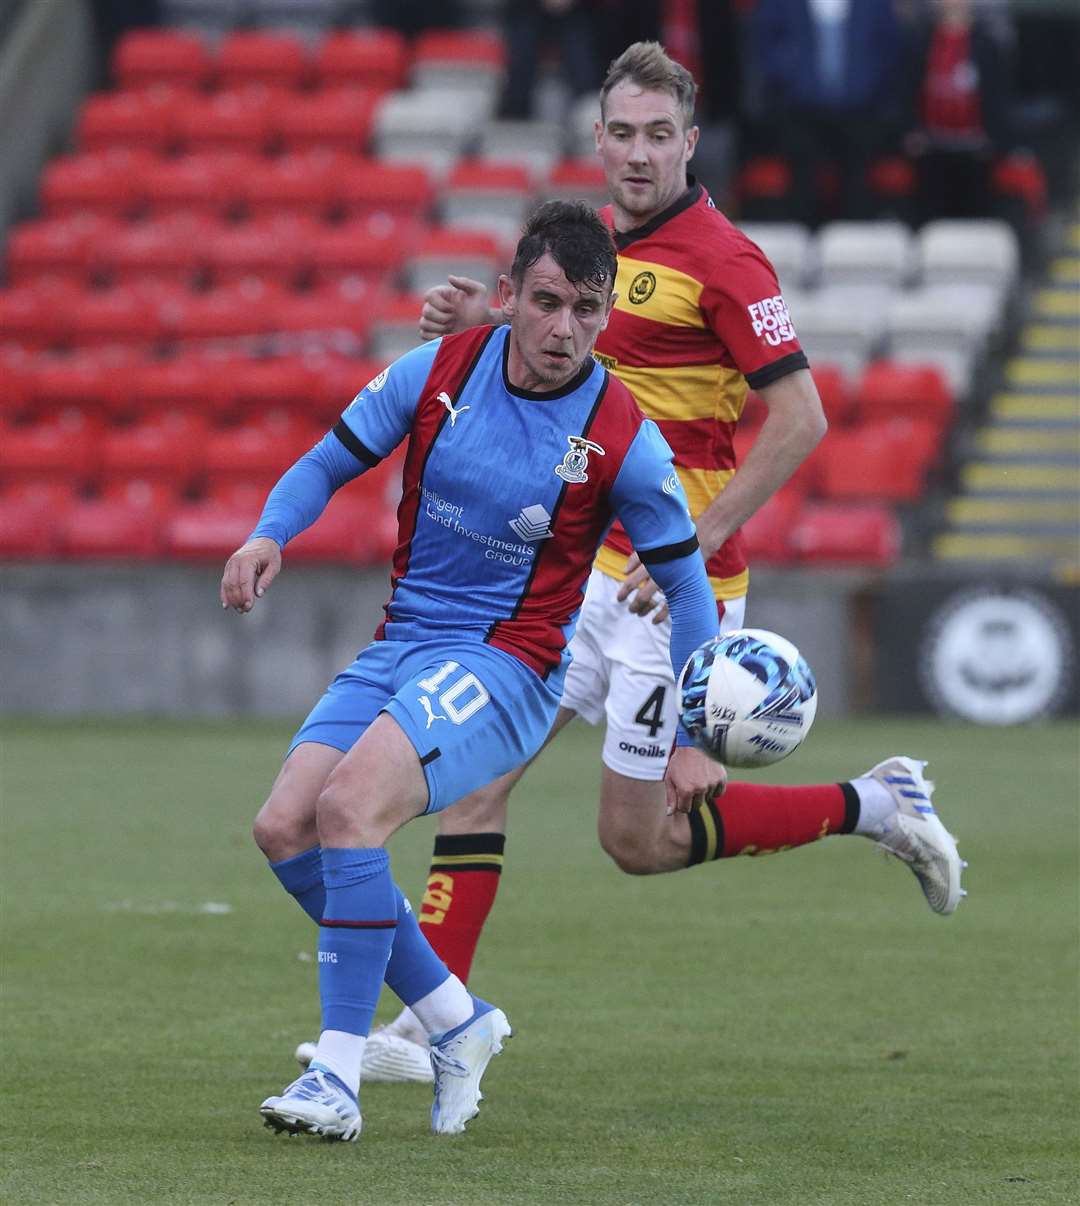 Aaron Doran in action for Caley Thistle.